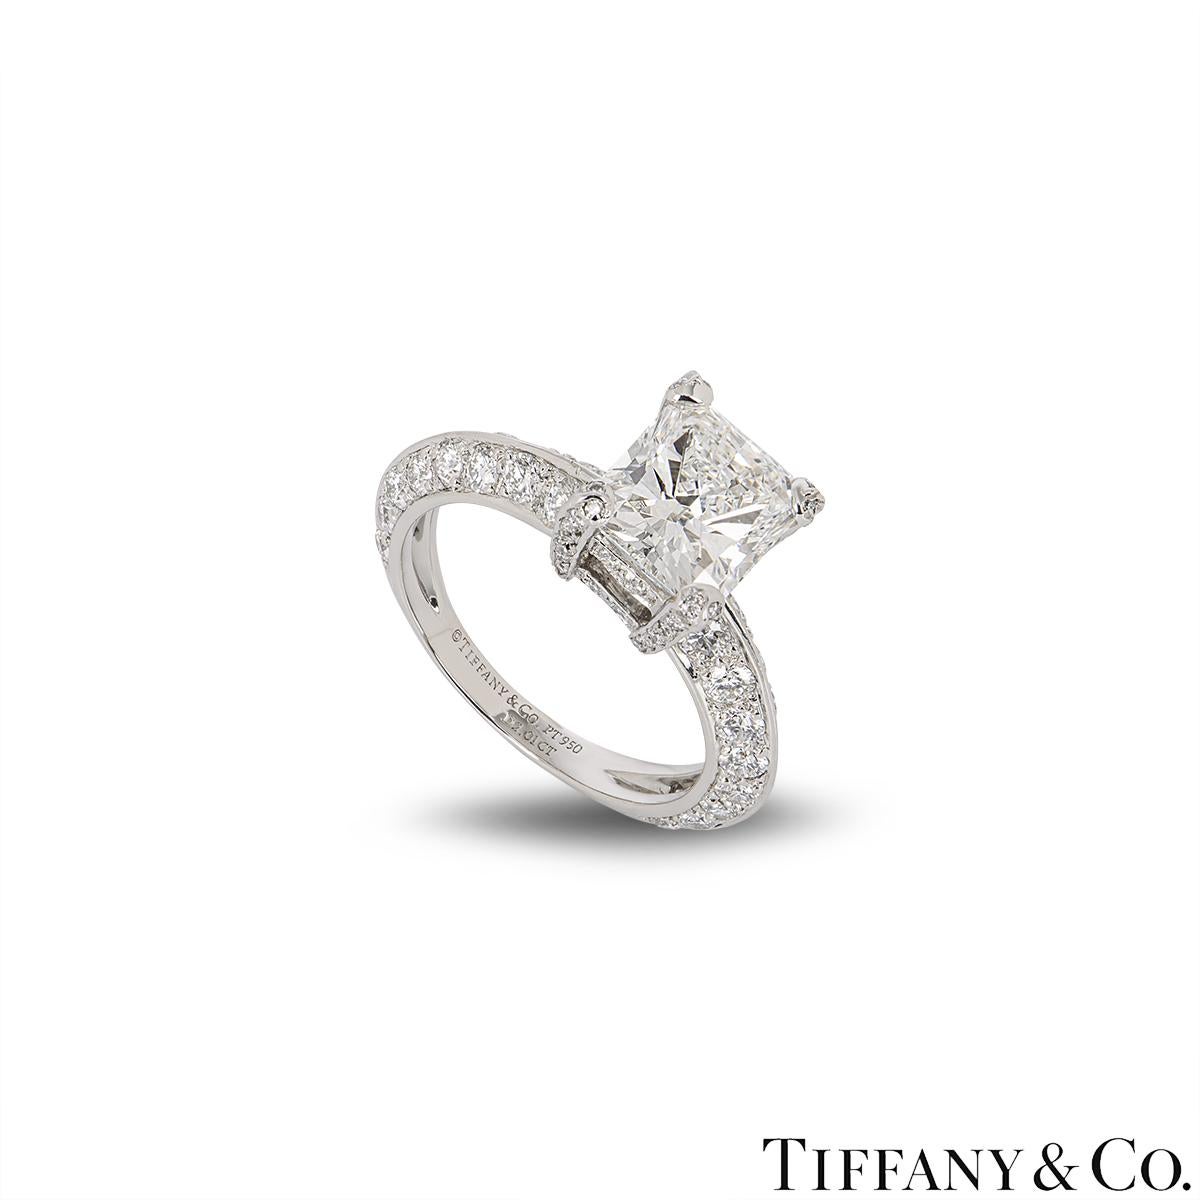 A stunning platinum diamond engagement ring by Tiffany & Co. The ring is set to the centre with a radiant cut diamond in an exquisite four claw mounting, weighing 2.01ct, G colour and IF (internally flawless) clarity. The knife edge engagement ring